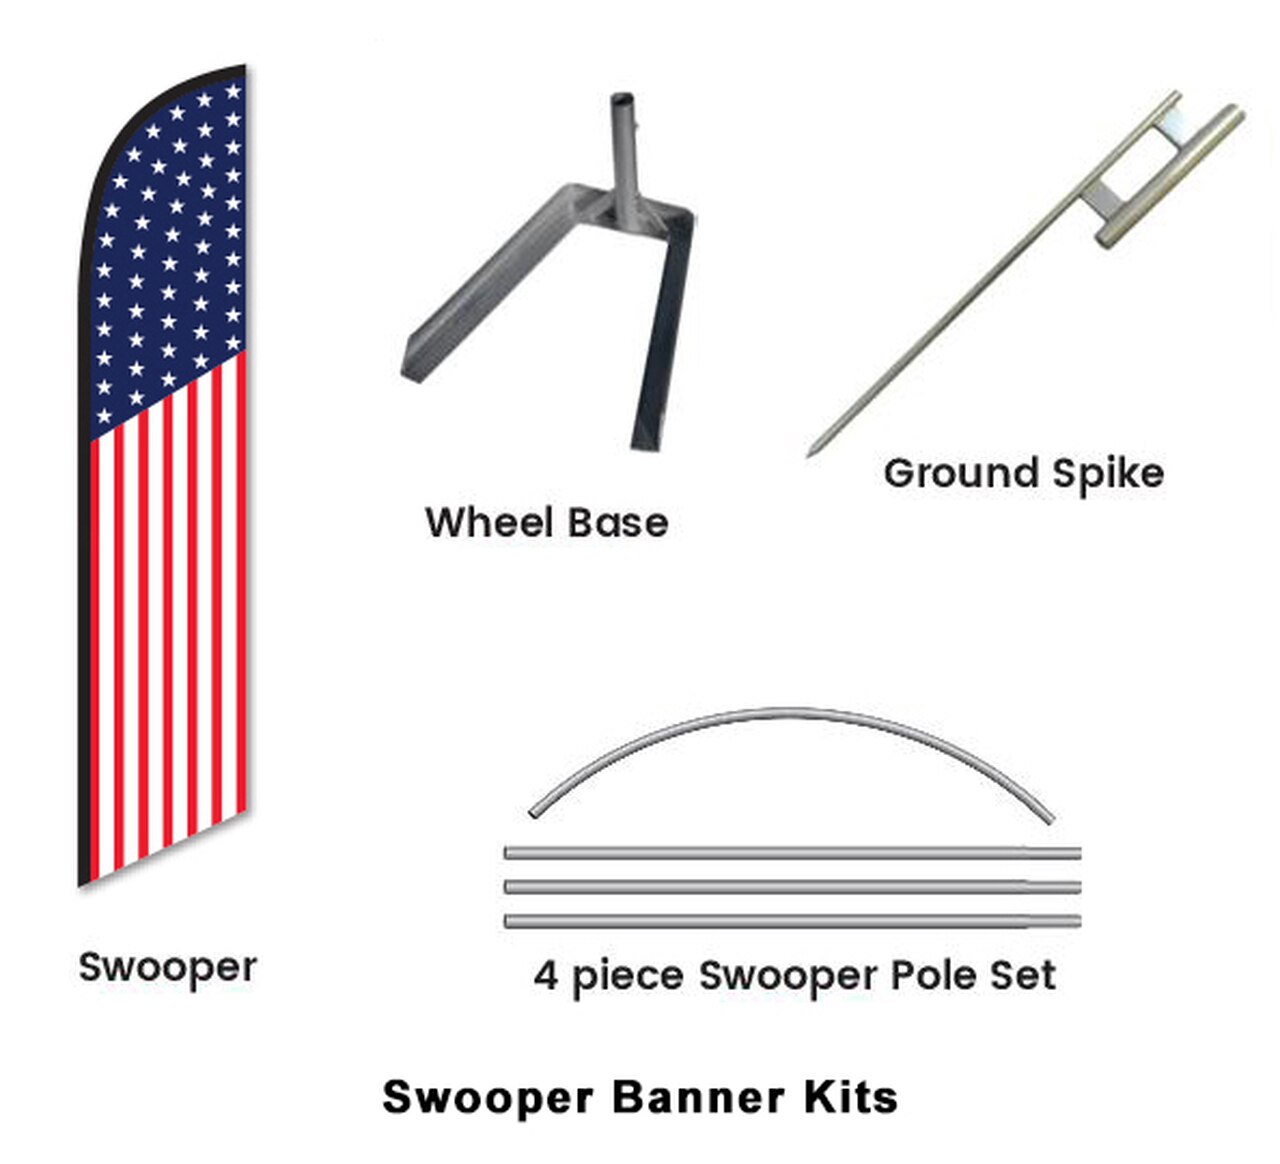 Swooper Banner Kits - Miscellaneous